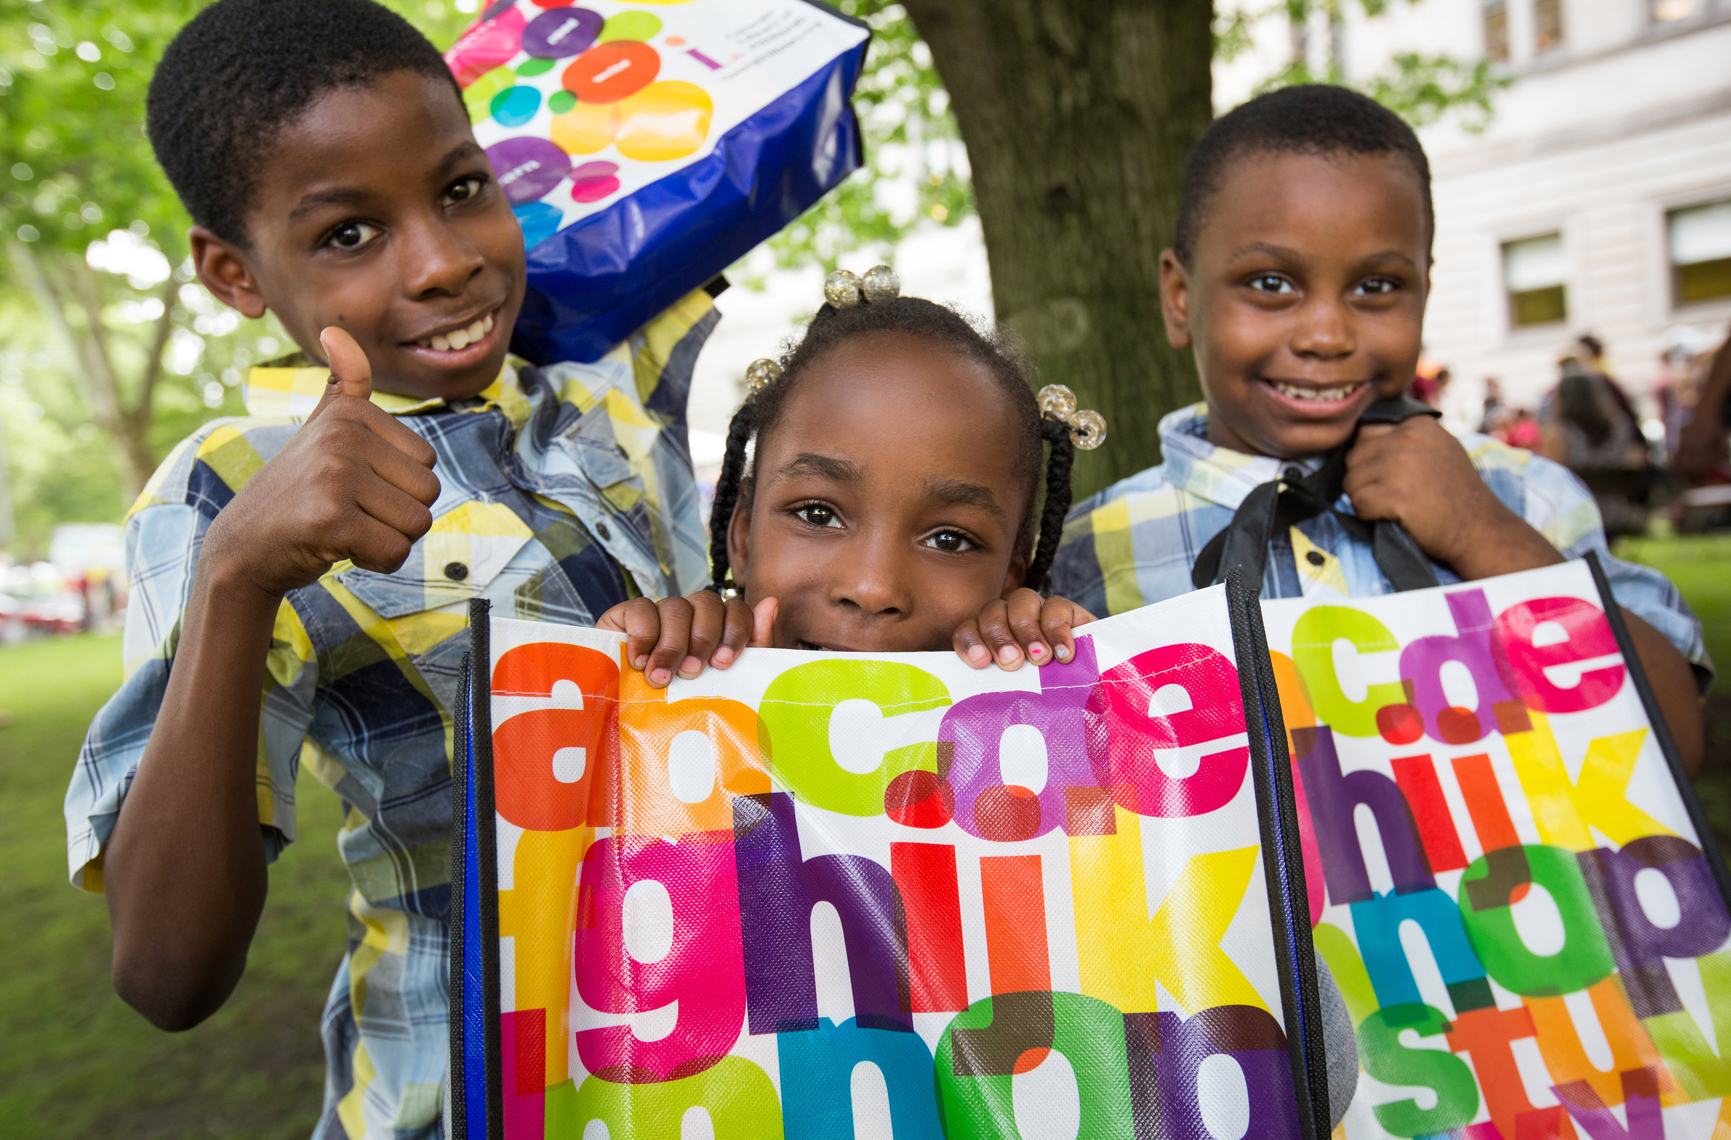 Three school children outside Carnegie Library of Pittsburgh, smiling and holding bags with colorful alphabet letters on them.